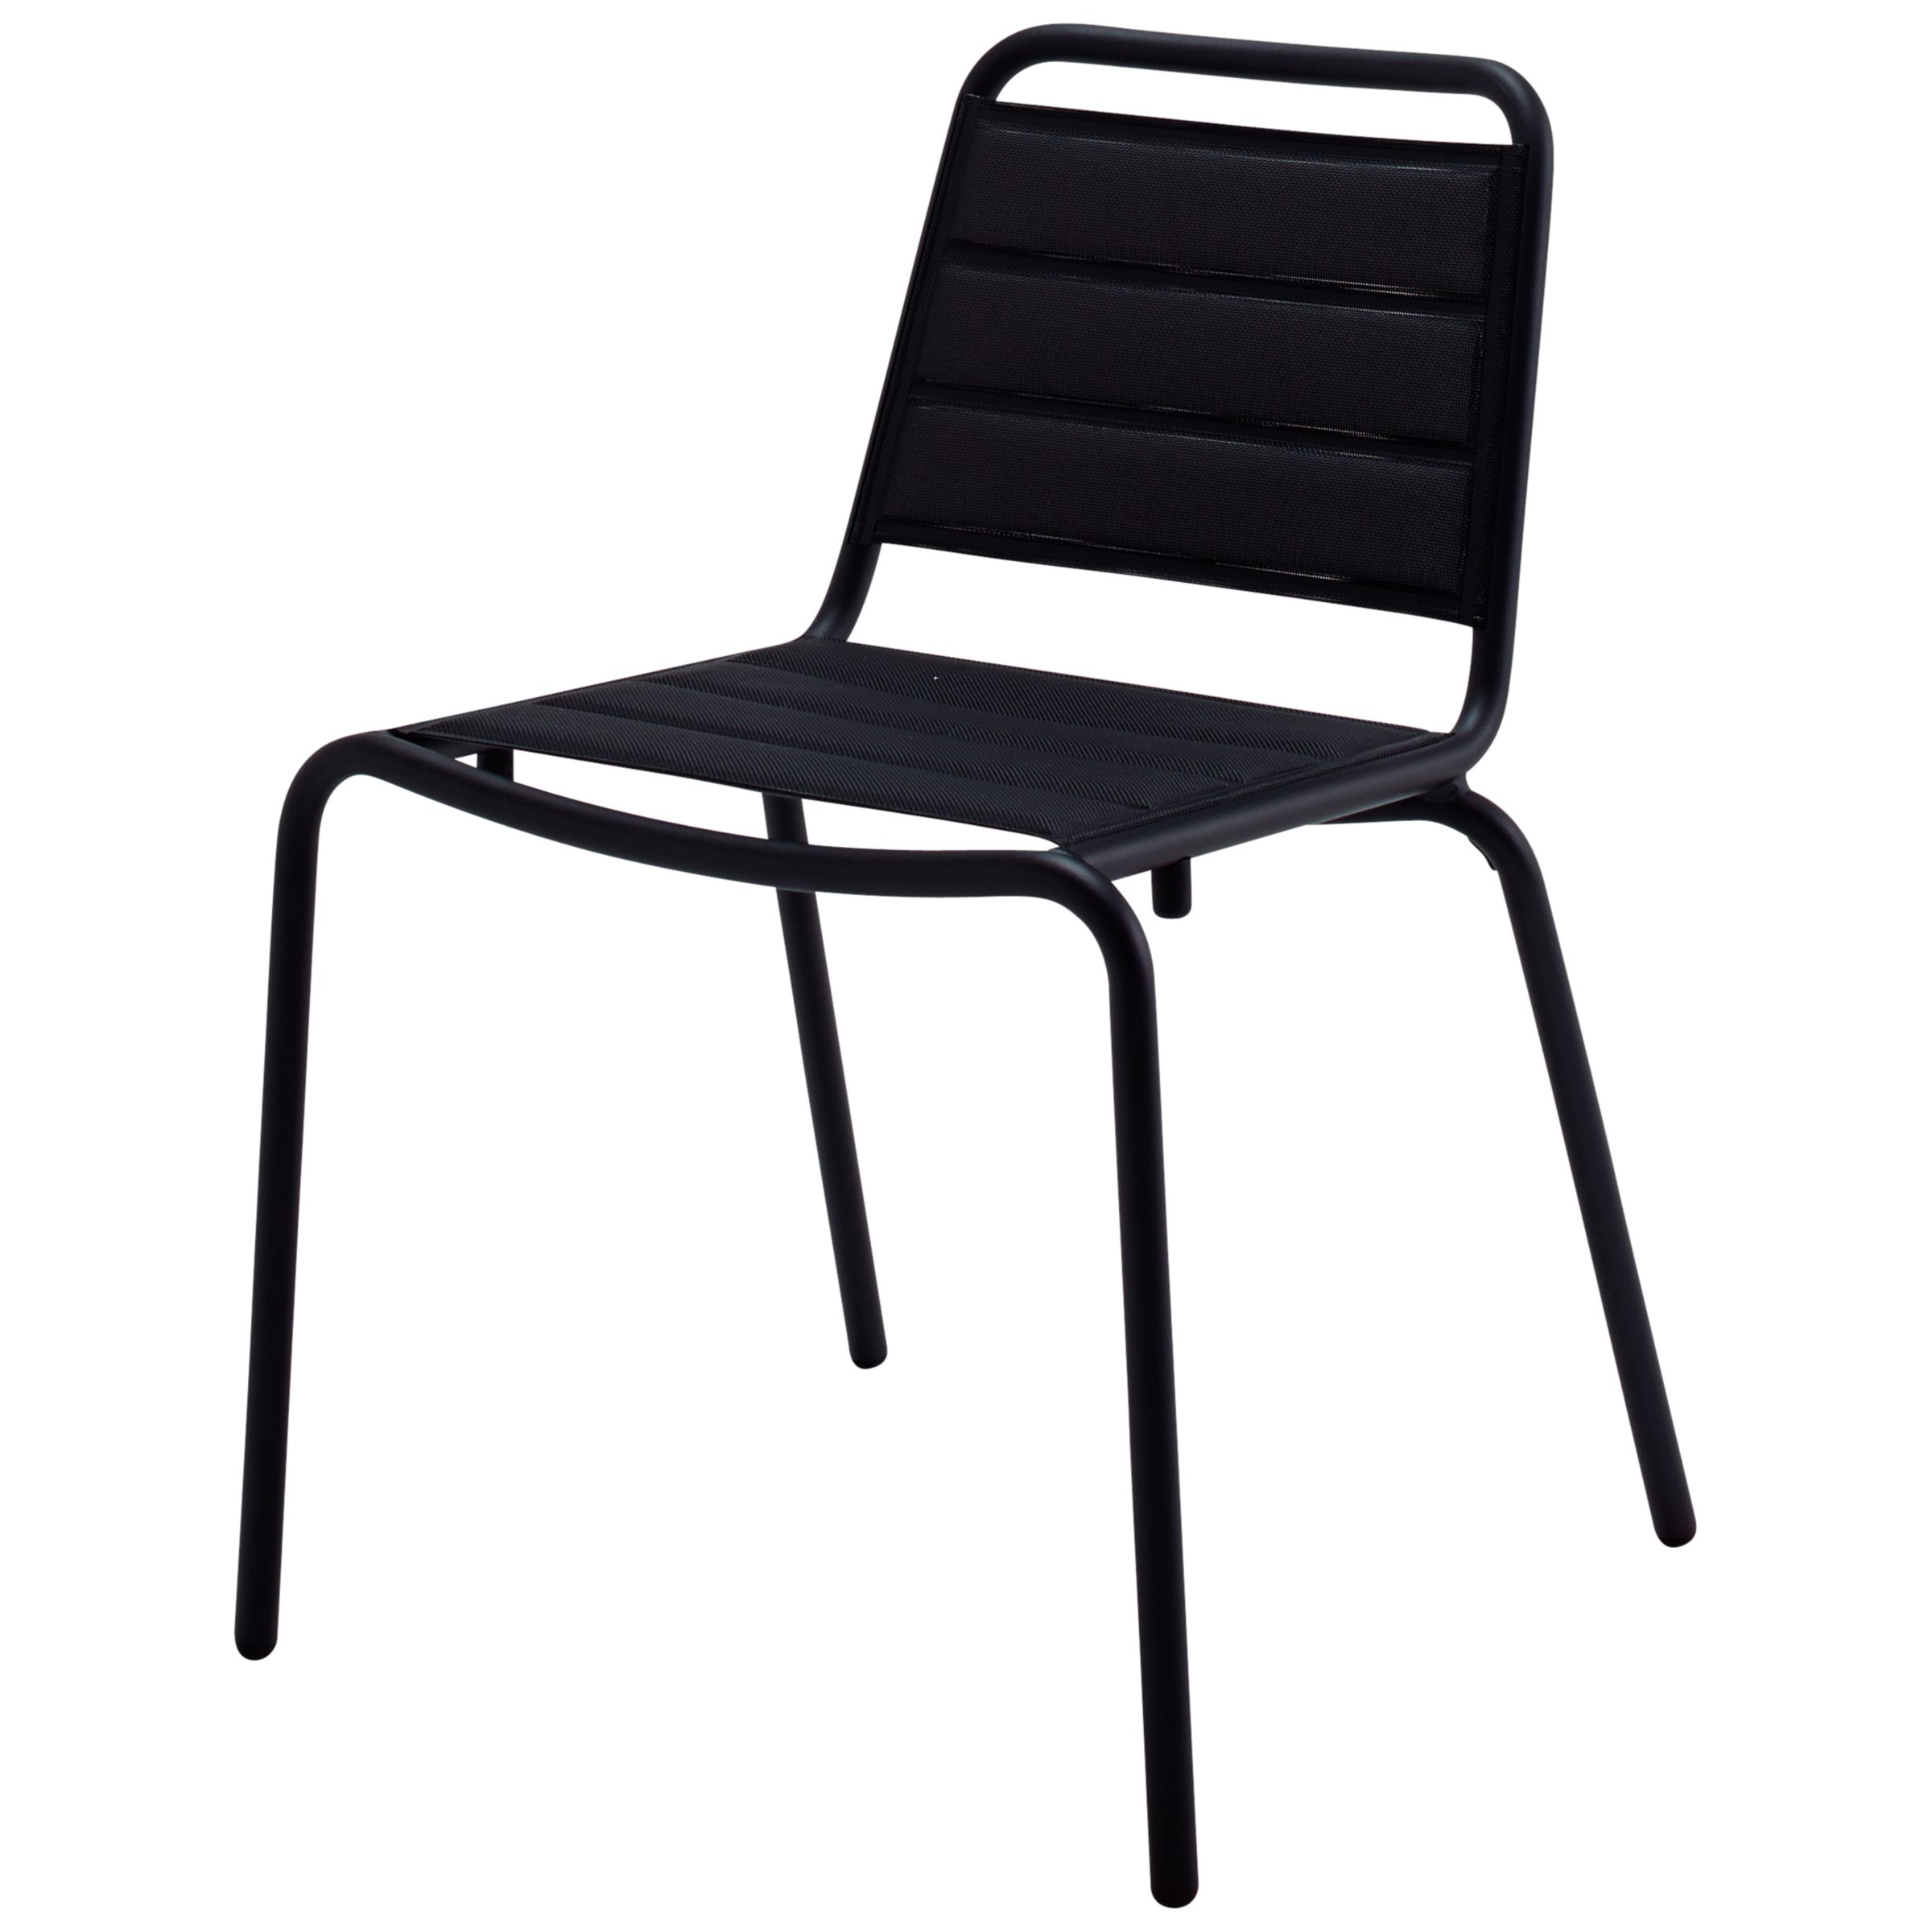 Gloster Nomad Padded Sling Stacking Chair, Black